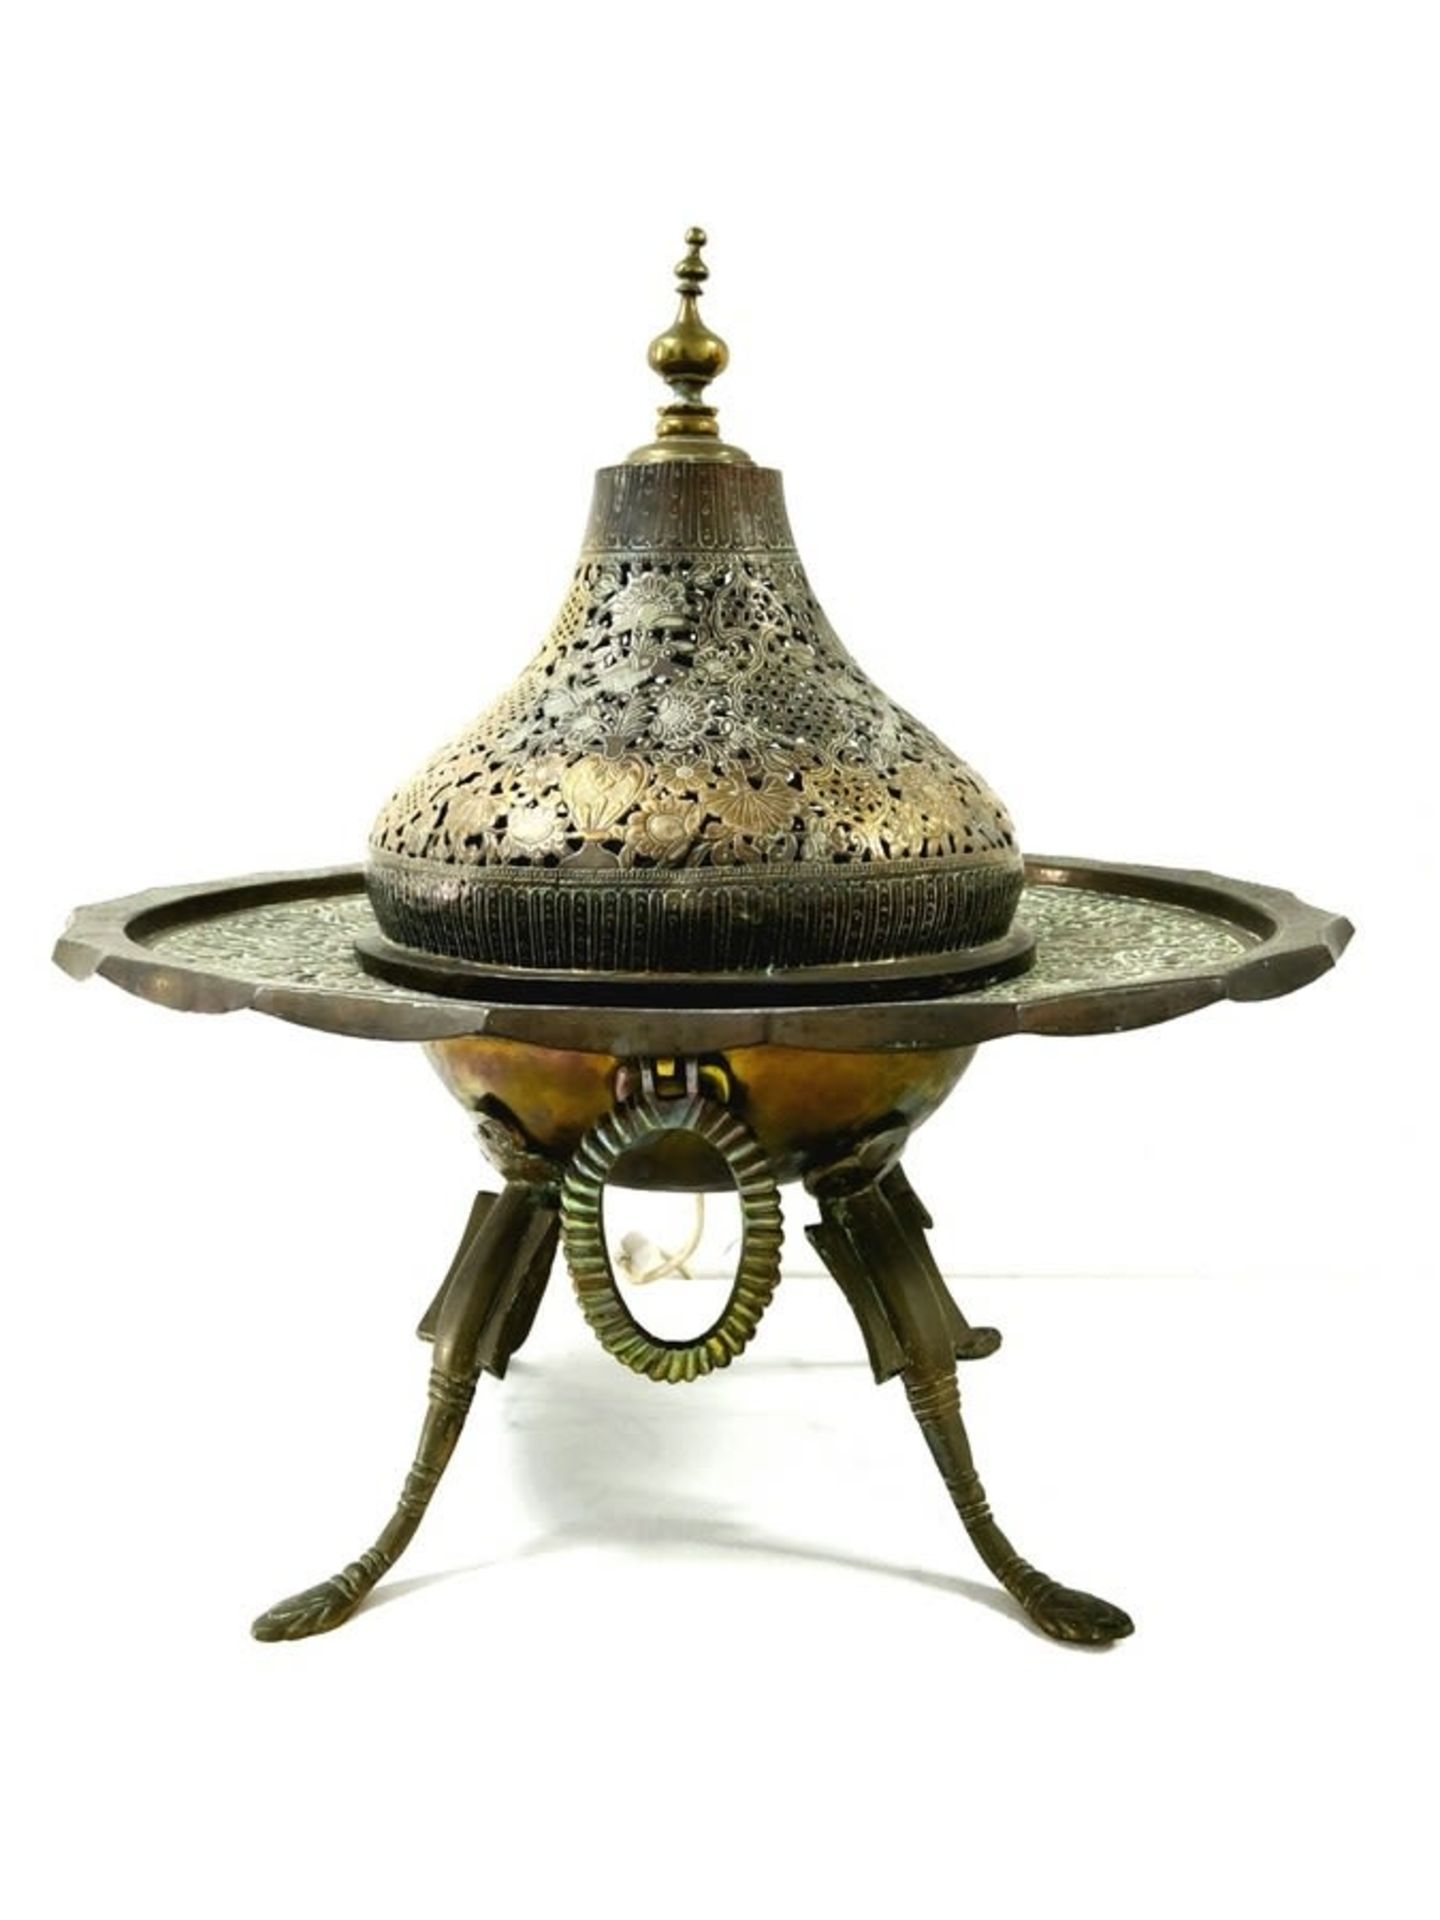 Impressive and high-quality antique Ottoman Turkish brazier, made of hammered and engraved sawn - Bild 3 aus 8